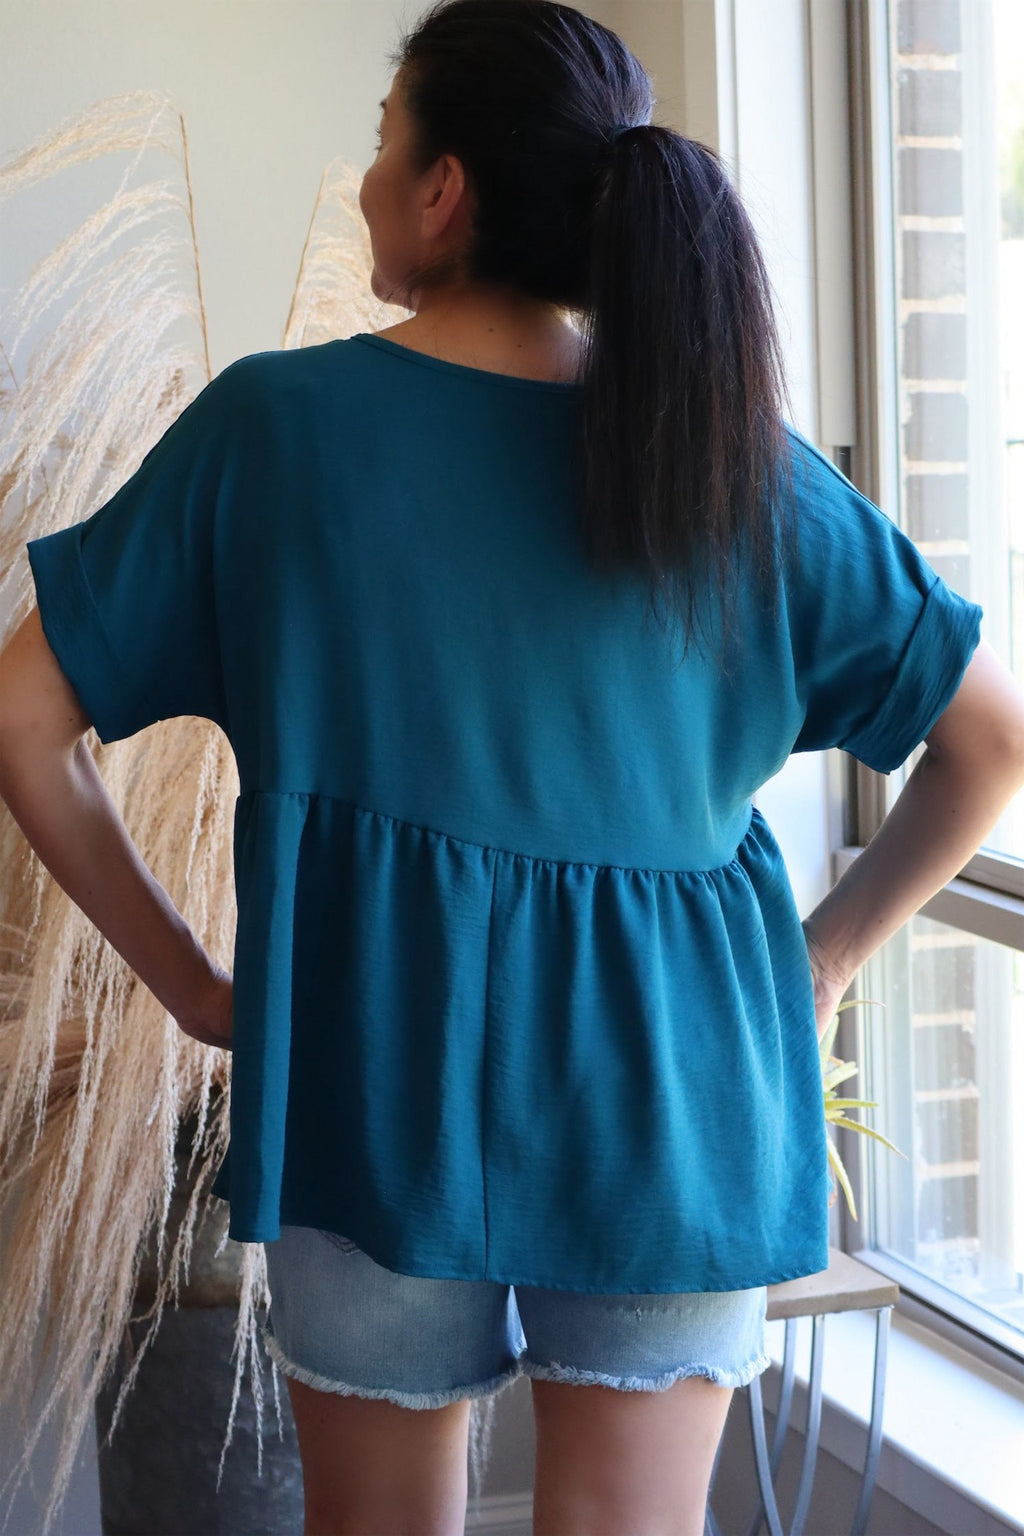 DIANA'S BABY DOLL BLOUSE - TEAL